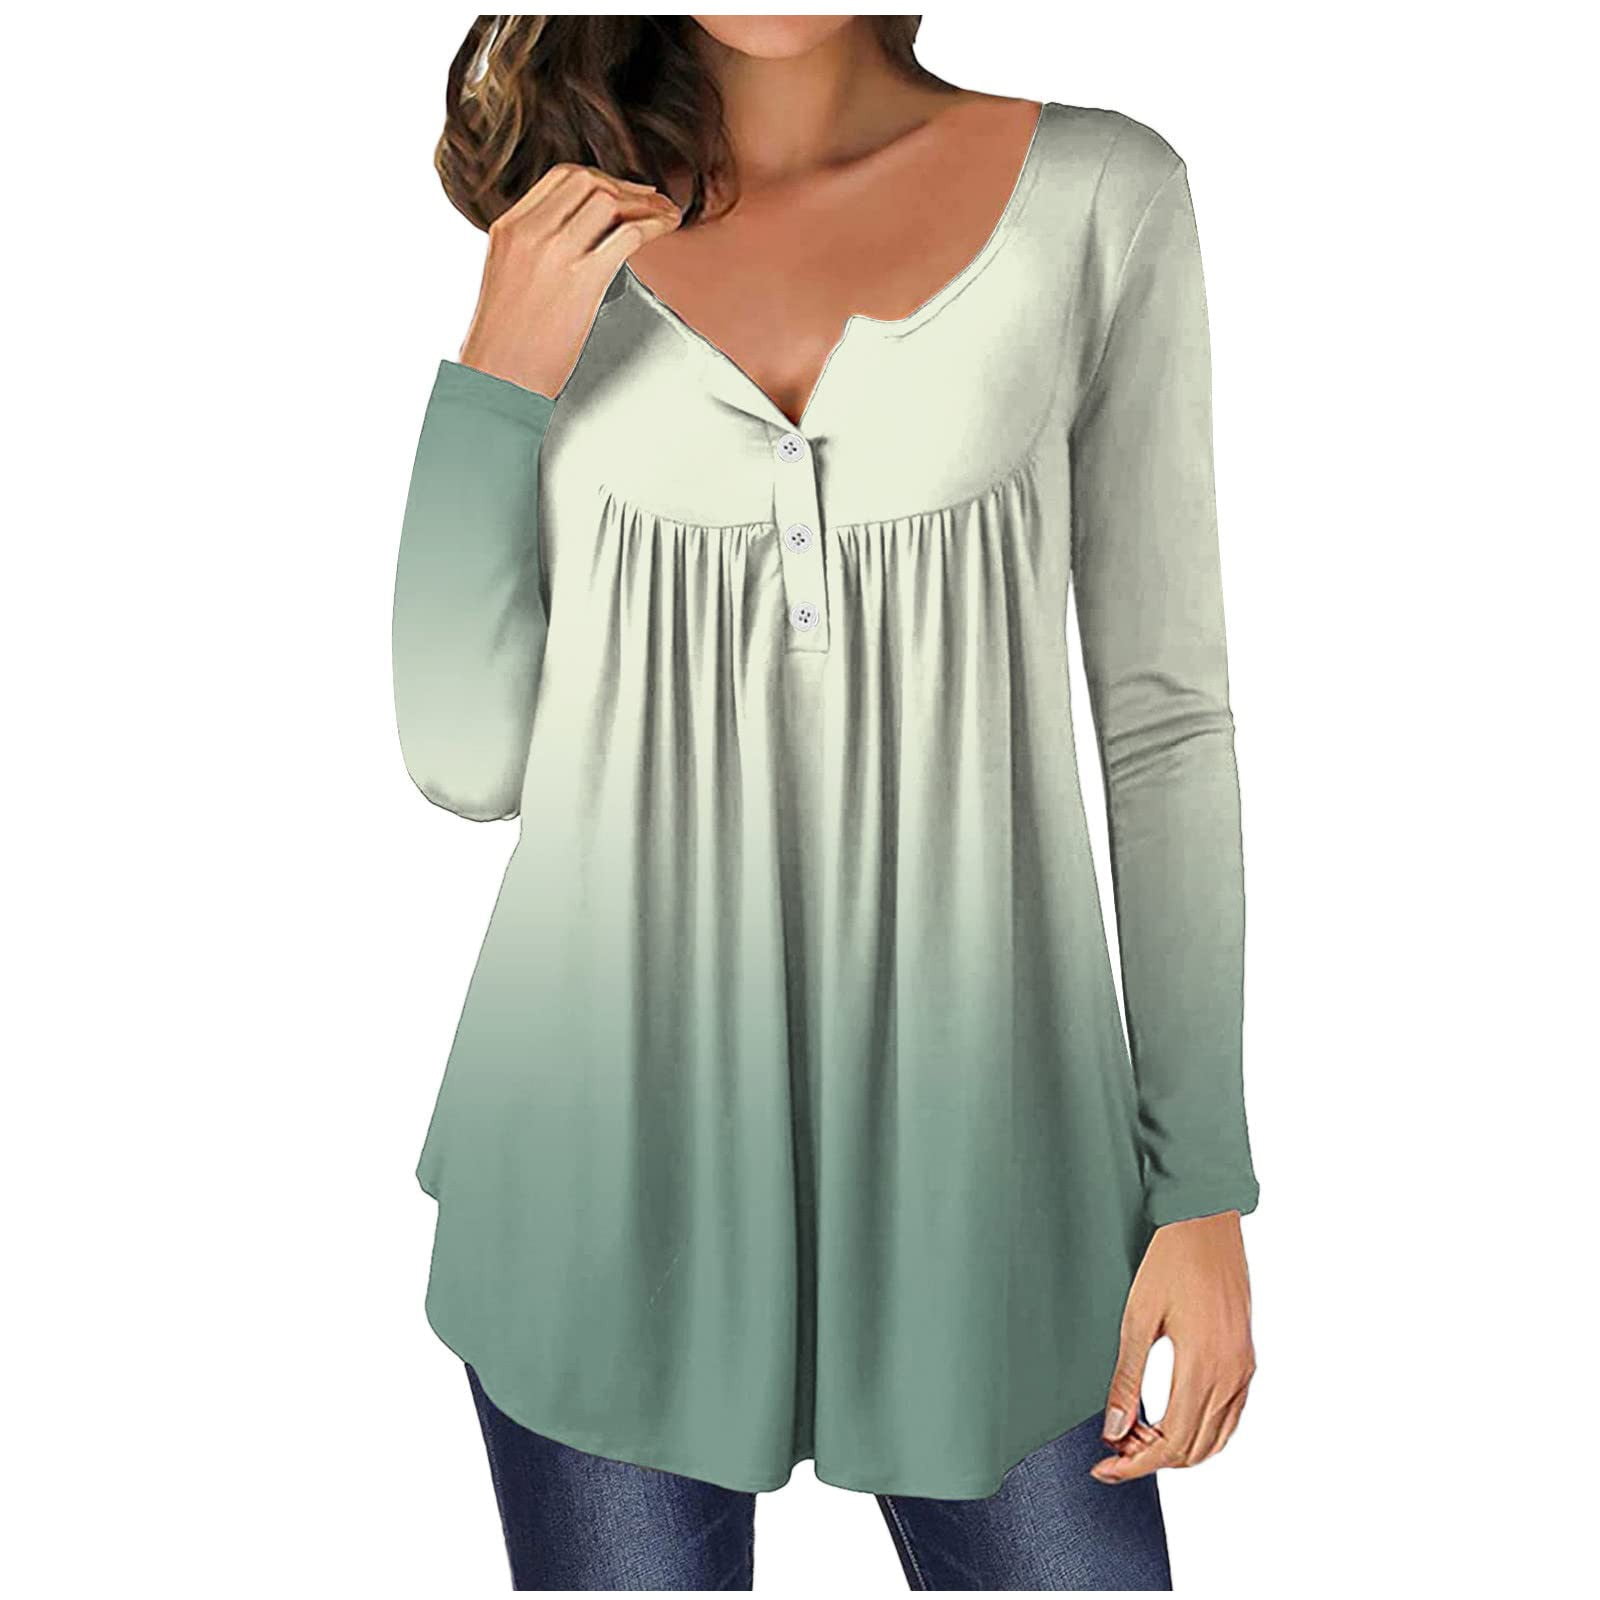 tklpehg Long Sleeve Shirts for Women Tunic Tops To Wear with